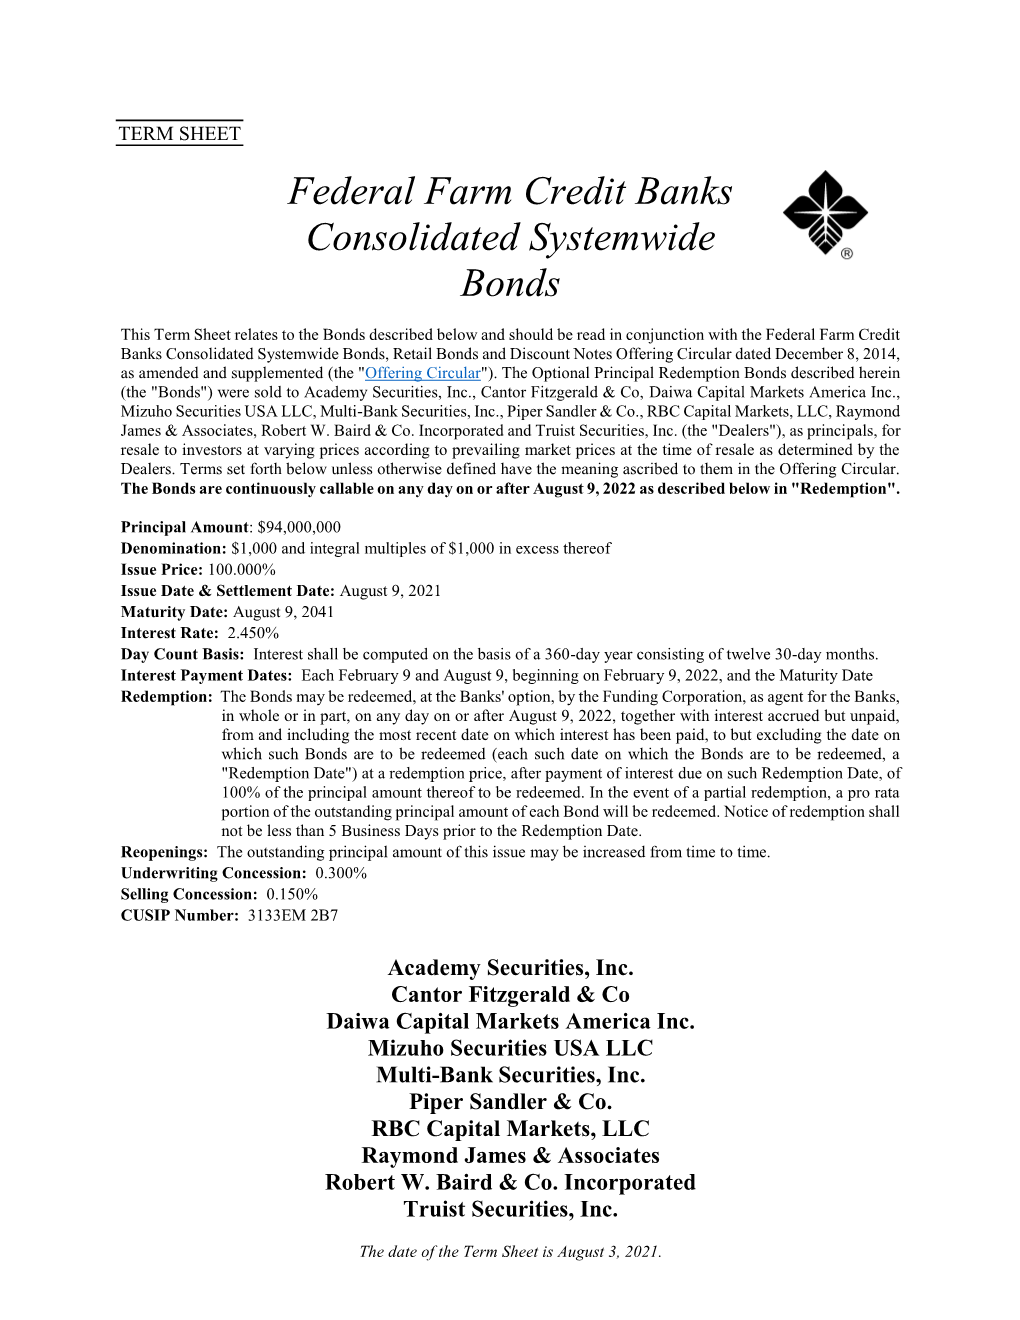 Federal Farm Credit Banks Consolidated Systemwide Bonds